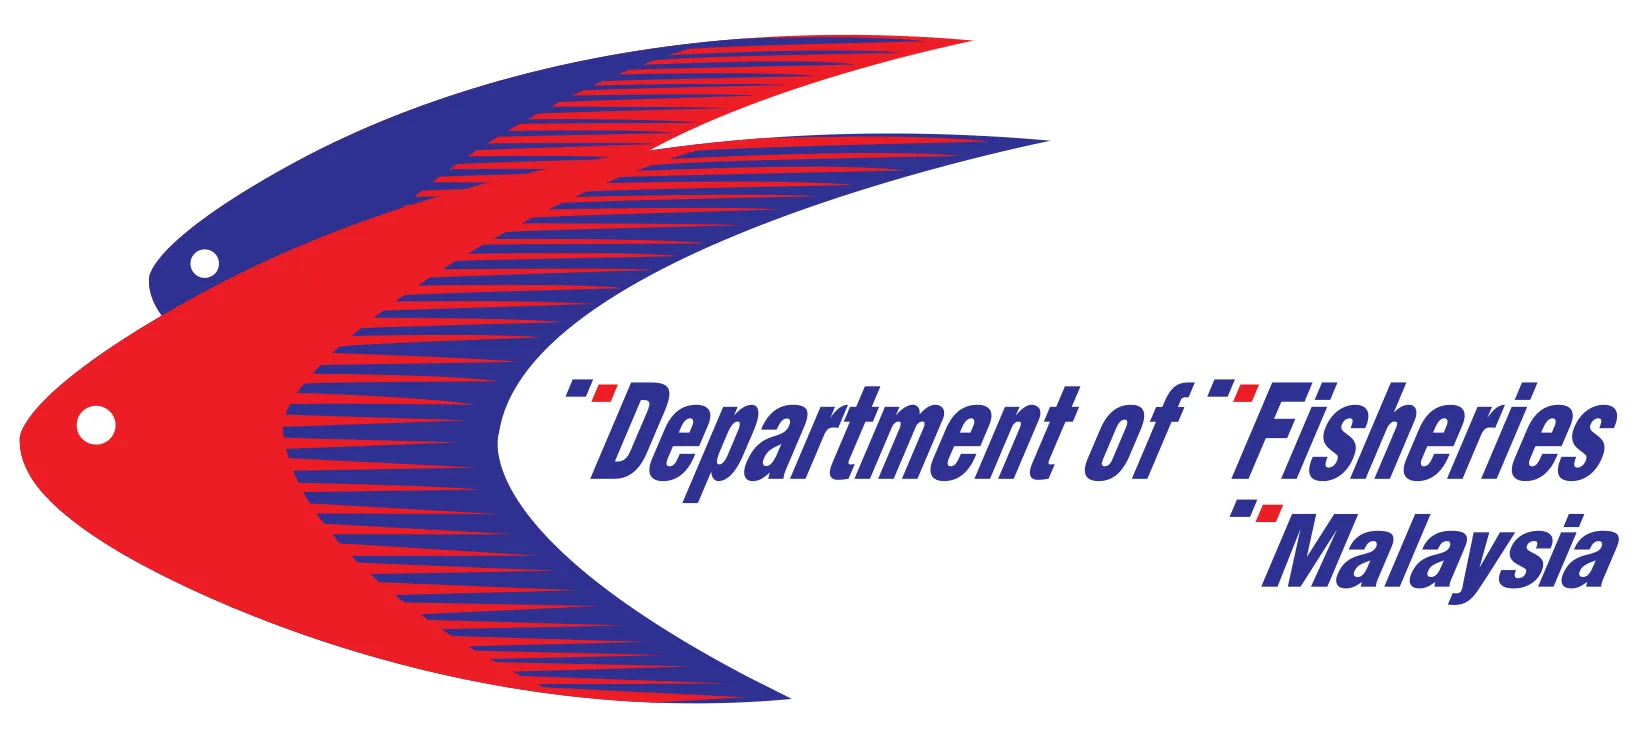 http://Department%20of%20Fisheries